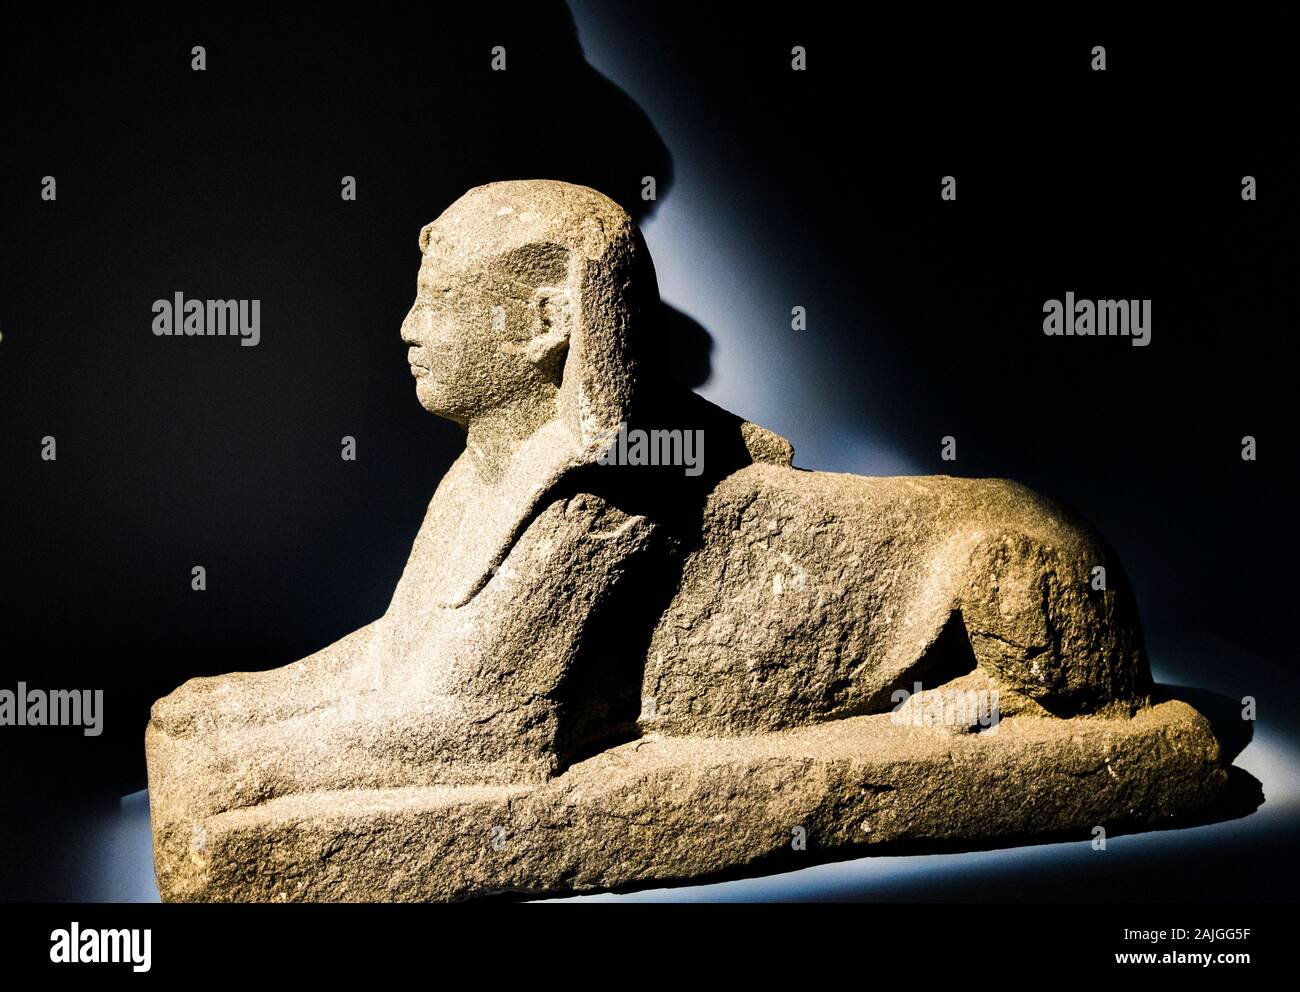 Photo taken during the opening visit of the exhibition “Osiris, Egypt's Sunken Mysteries”. Egypt, Alexandria, National Museum, a ptolemaic sphinx. Stock Photo